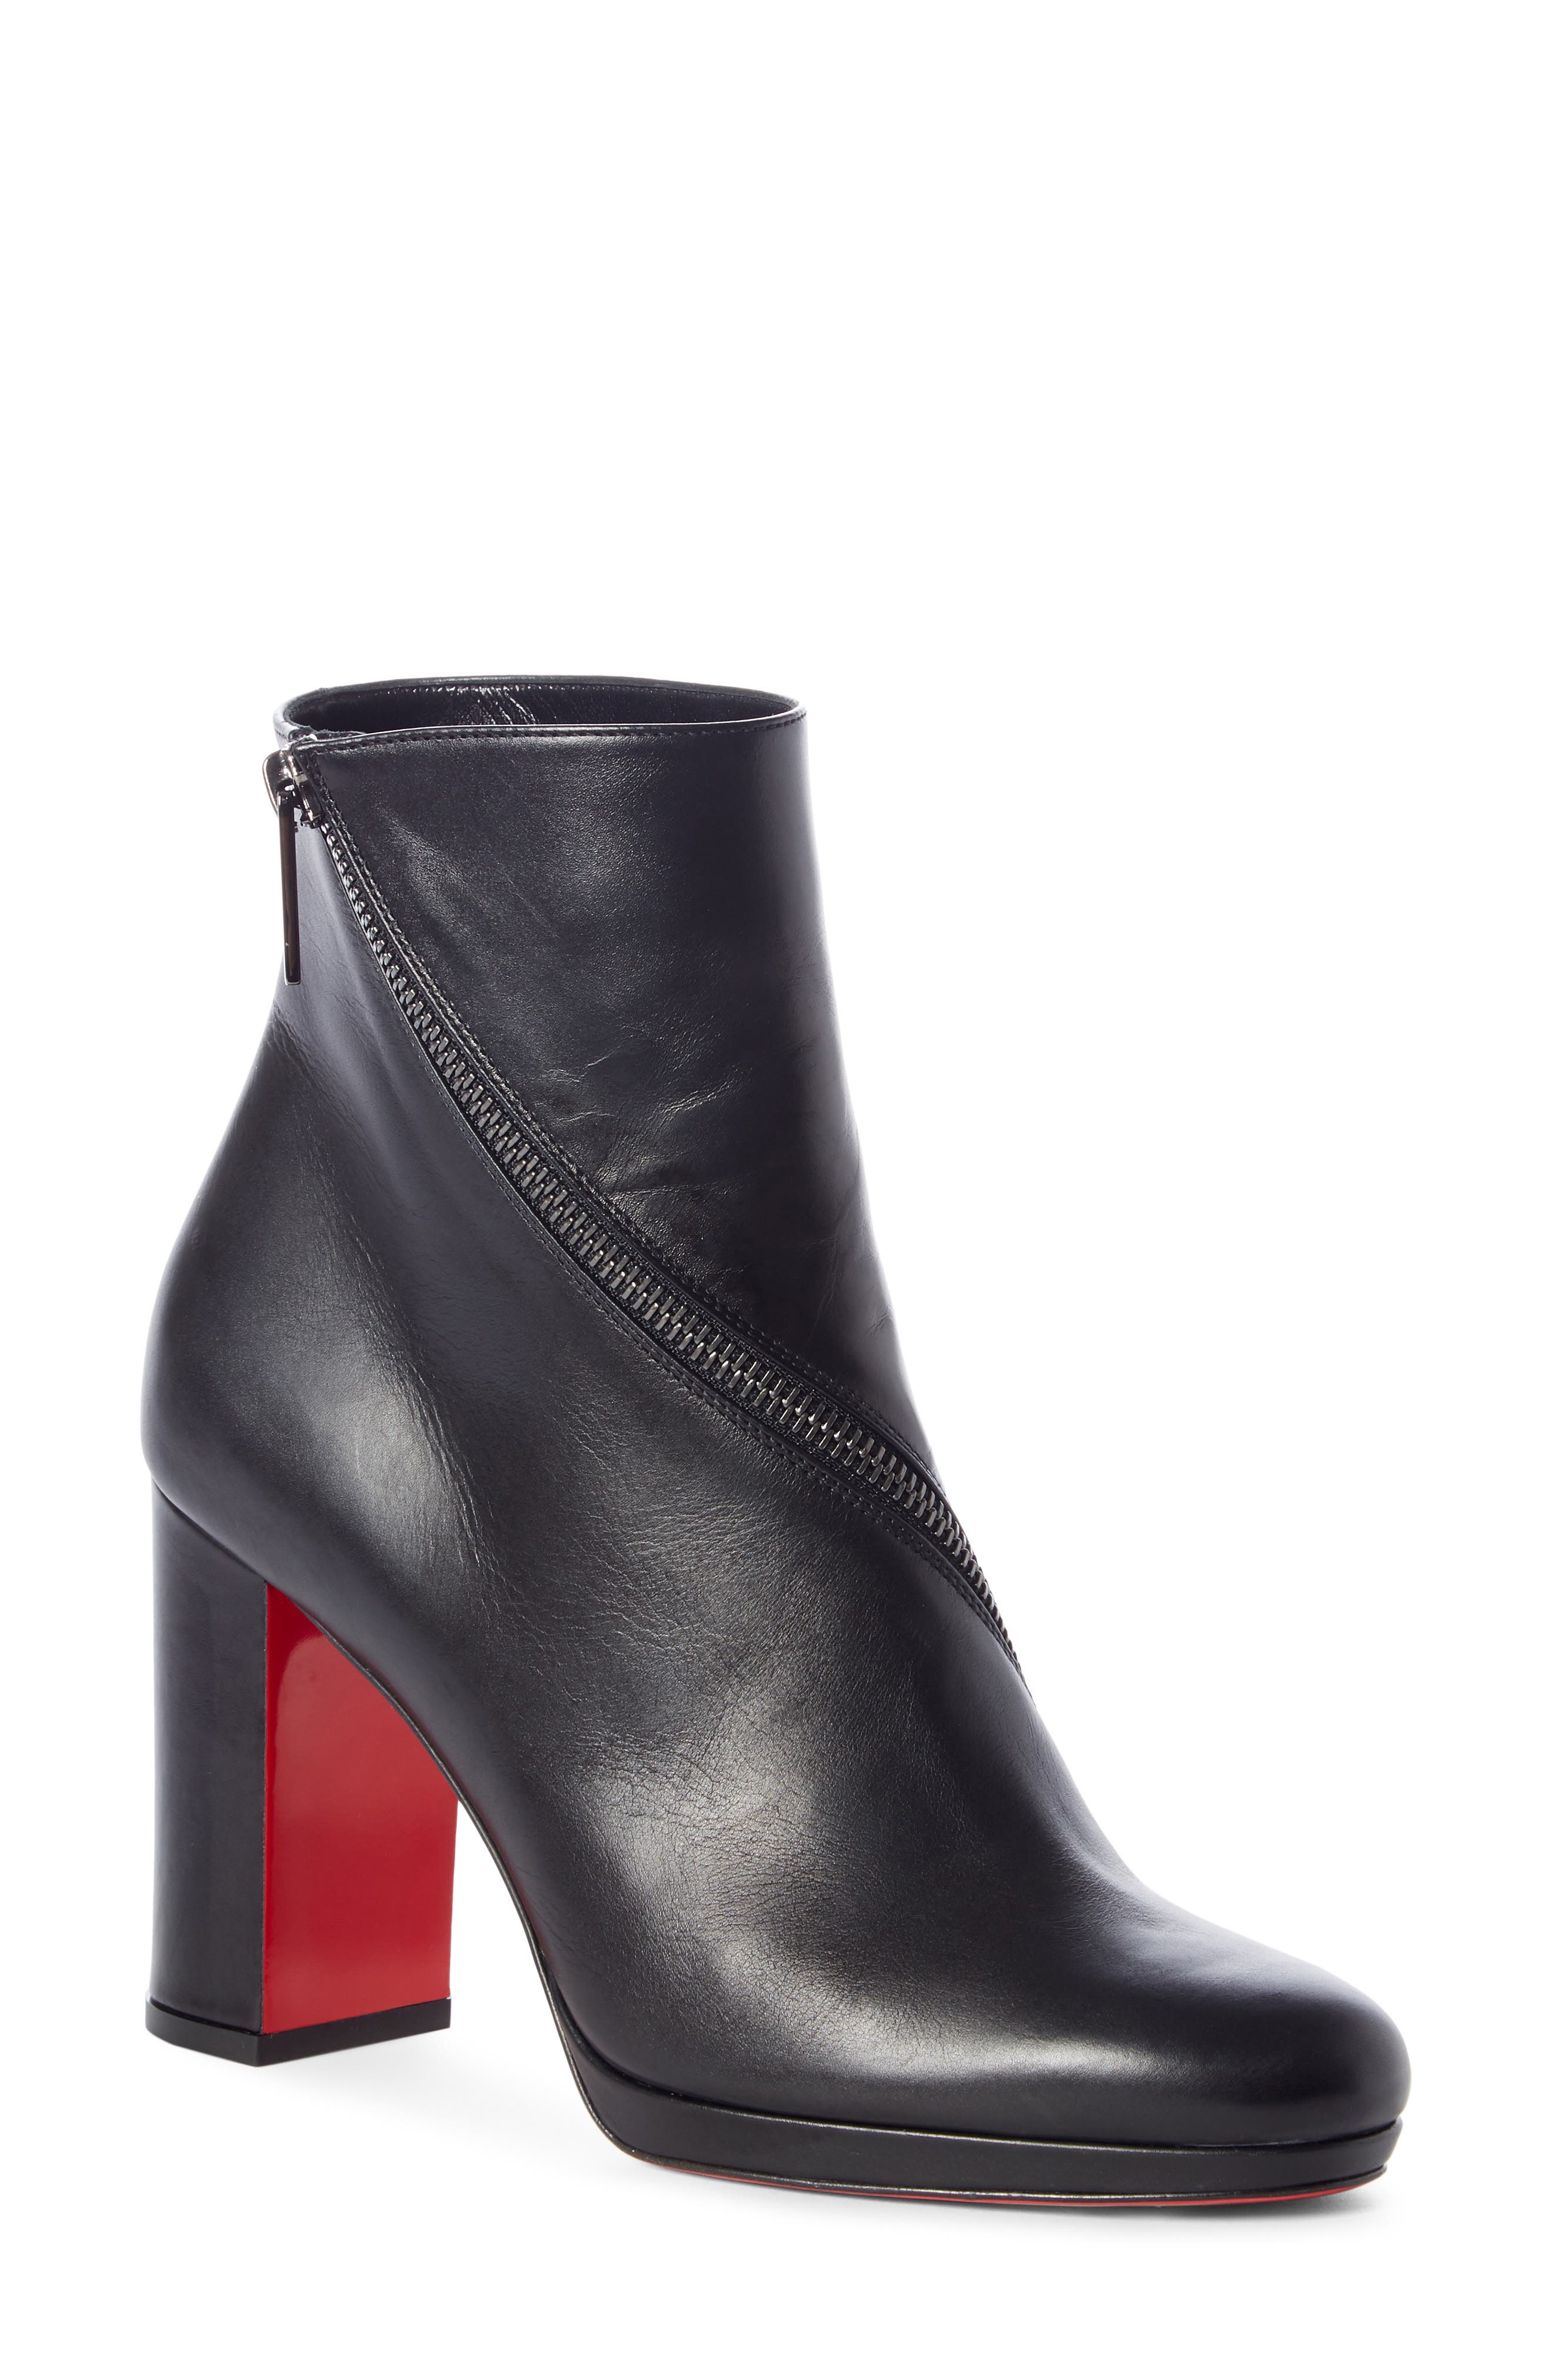 louboutin boots nordstrom